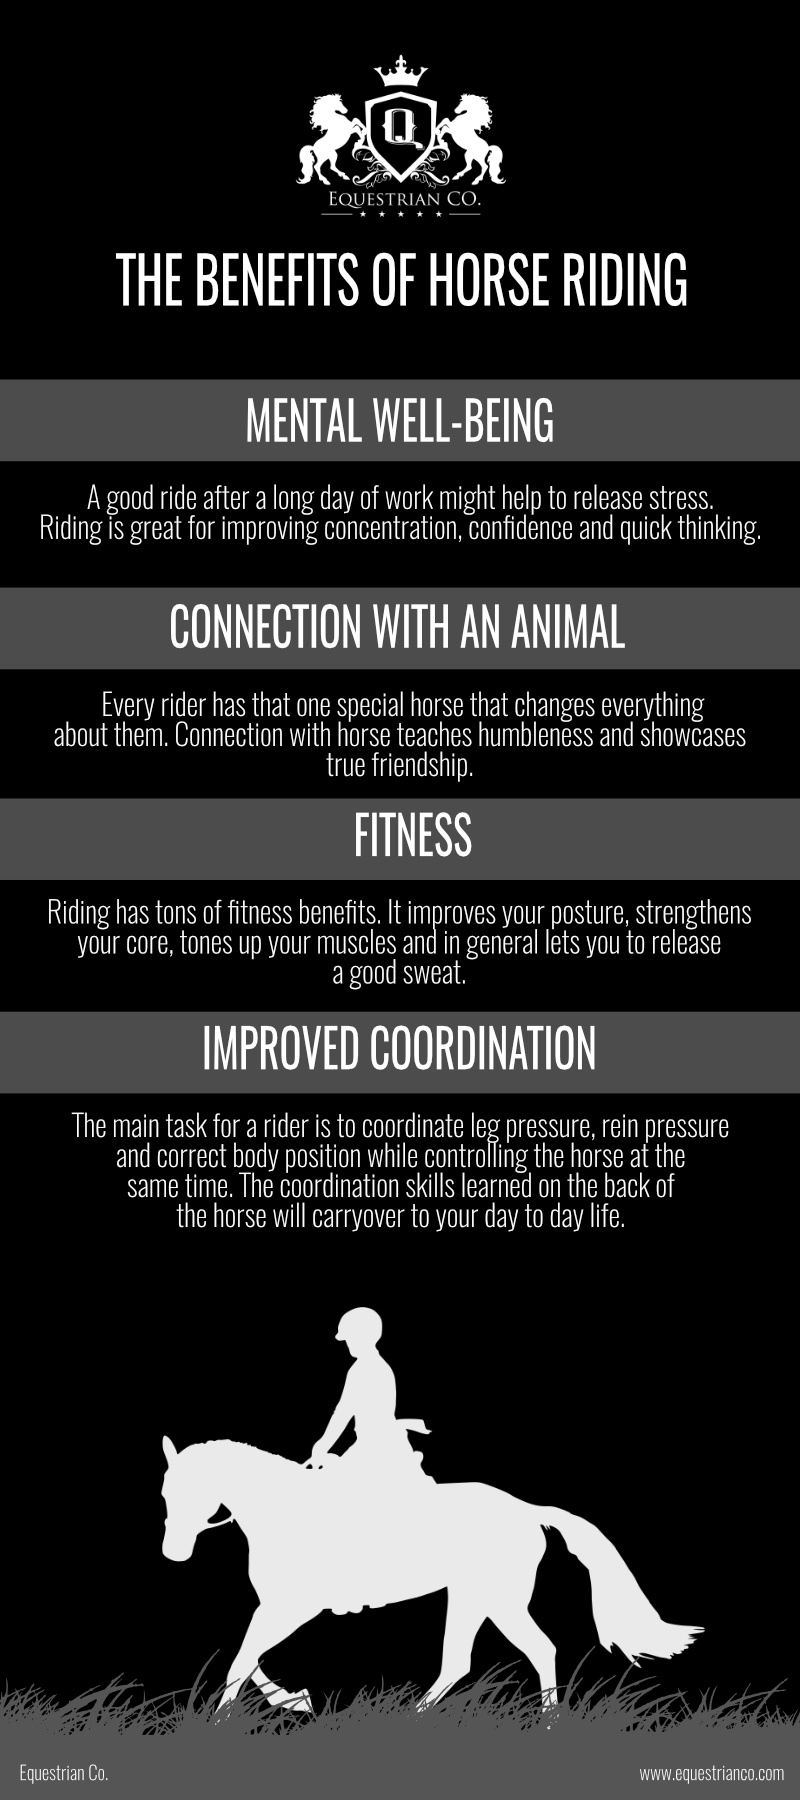 The Benefits of Horse Riding